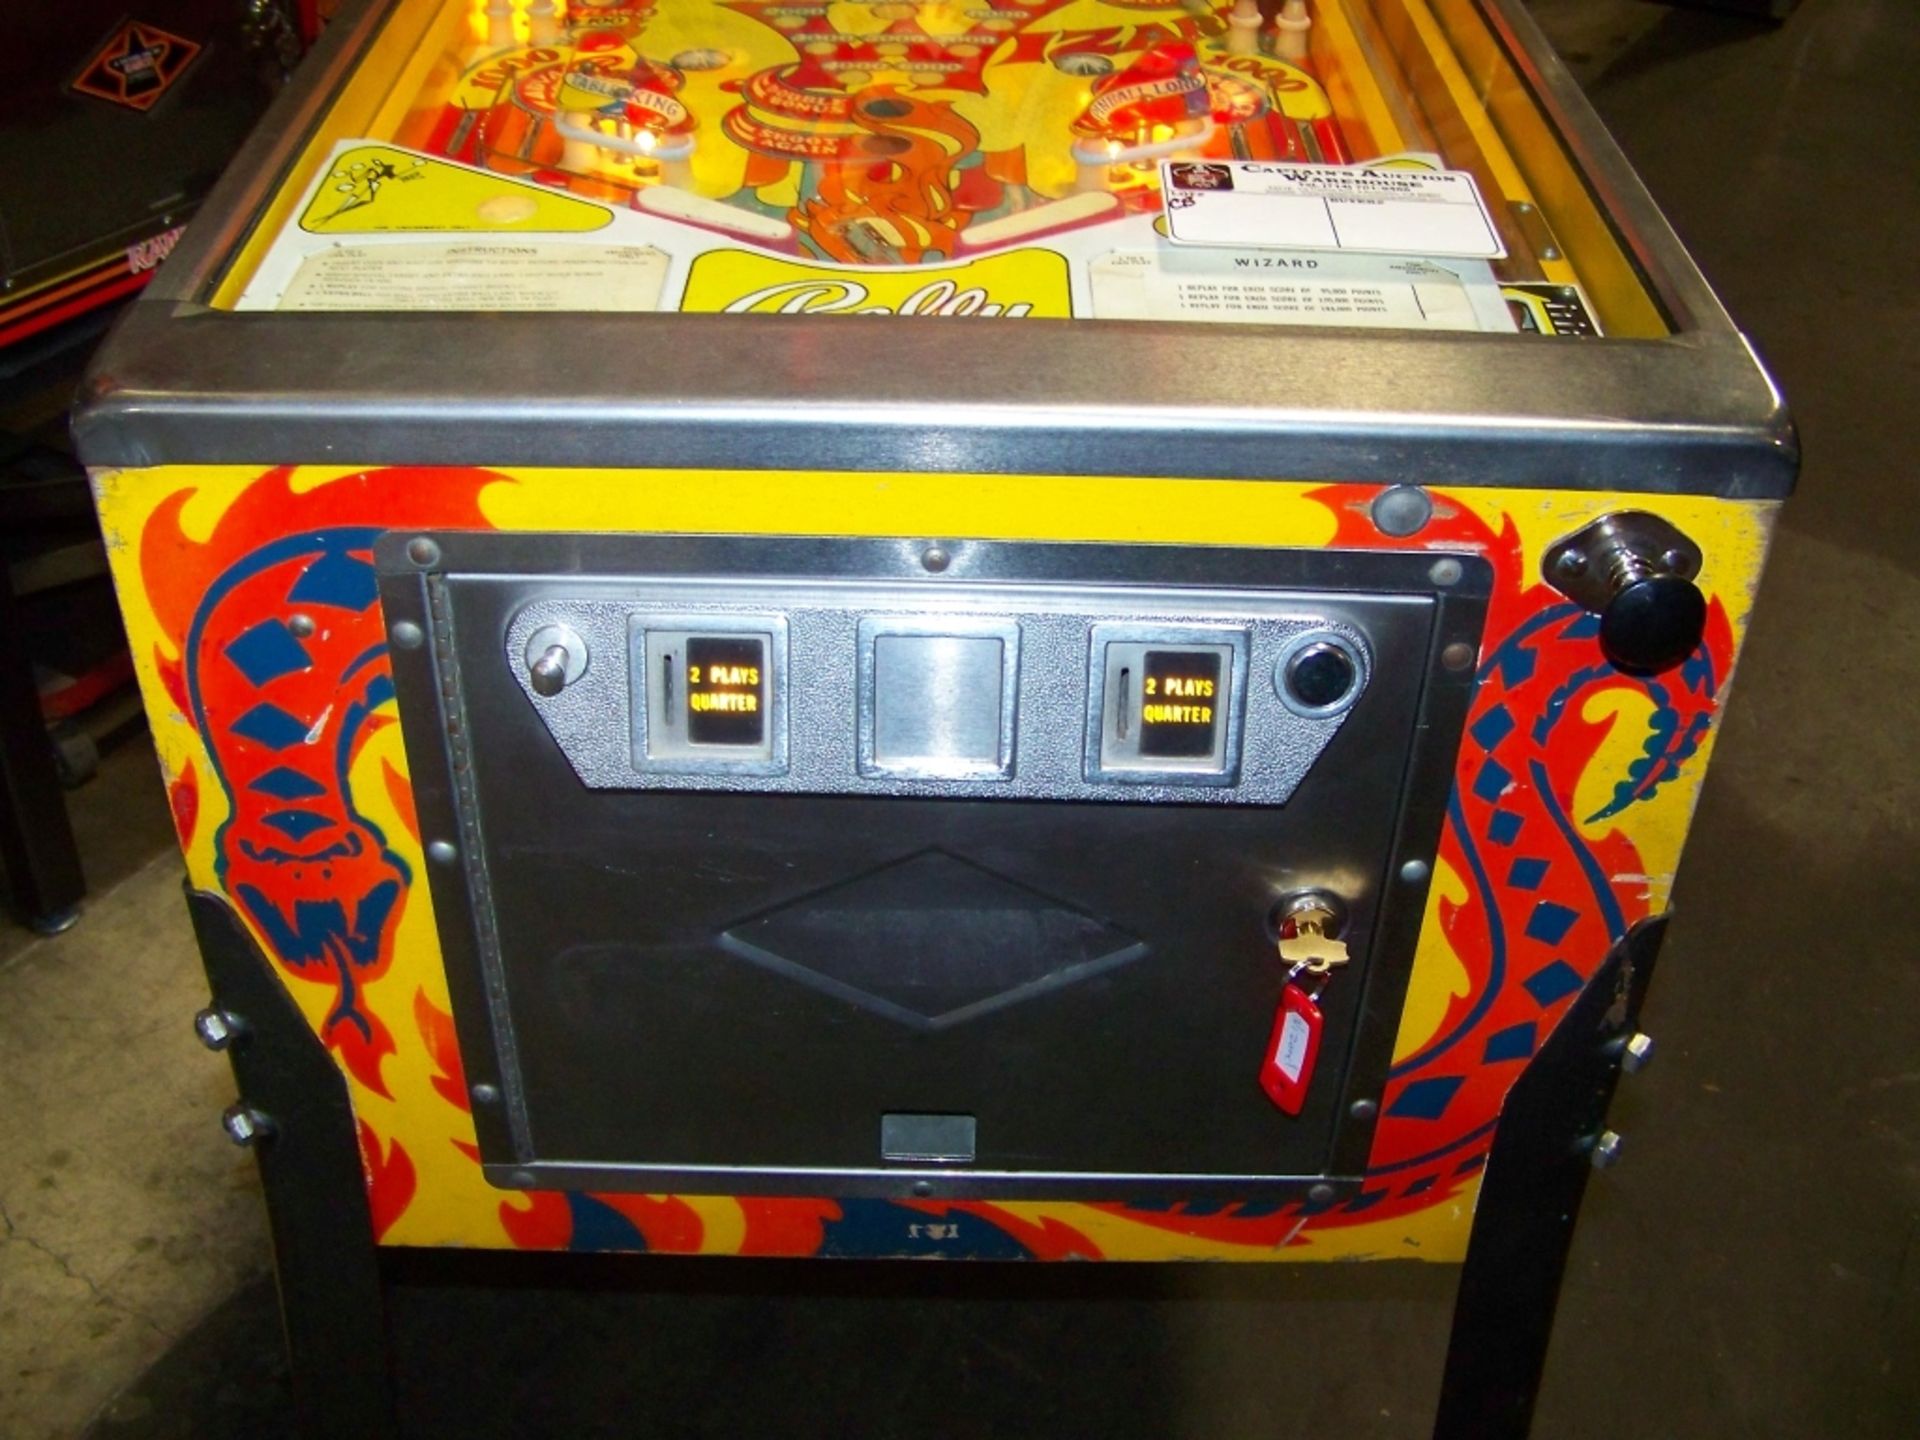 WIZARD! PINBALL MACHINE BALLY E.M. 1975 Item is in used condition. Evidence of wear and commercial - Image 10 of 10